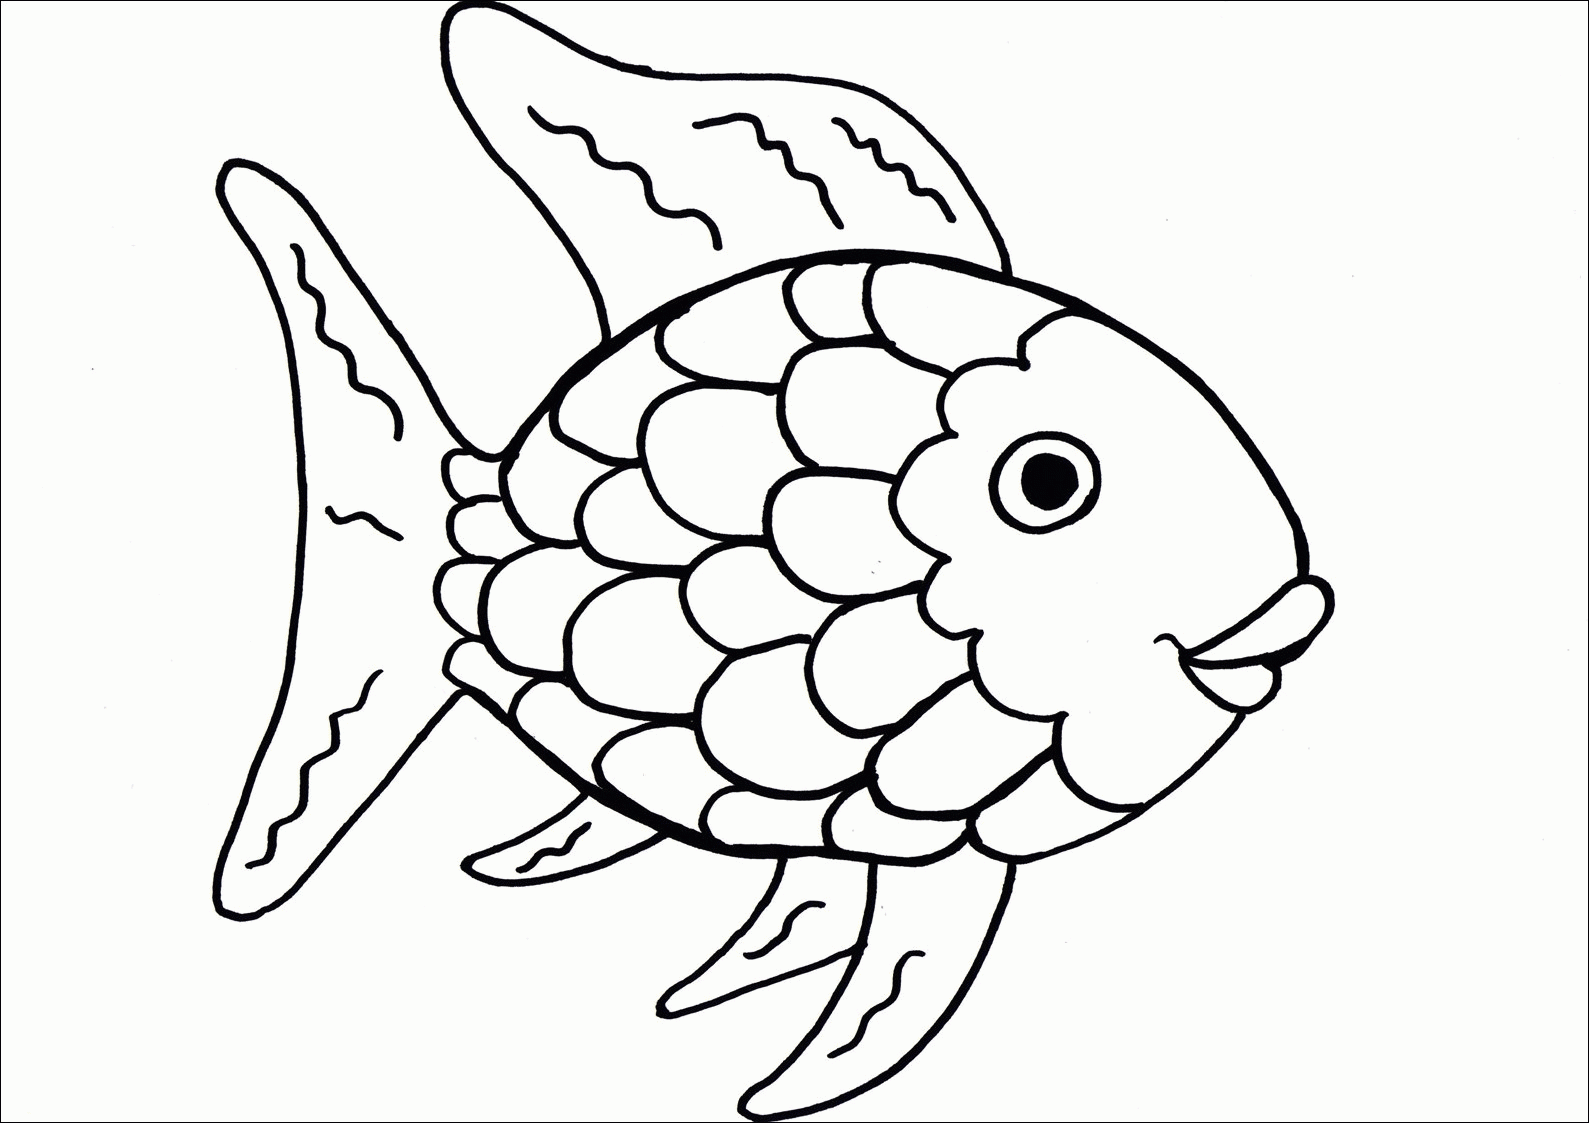 Rainbow Fish Coloring Pages | haeadvrlistscom